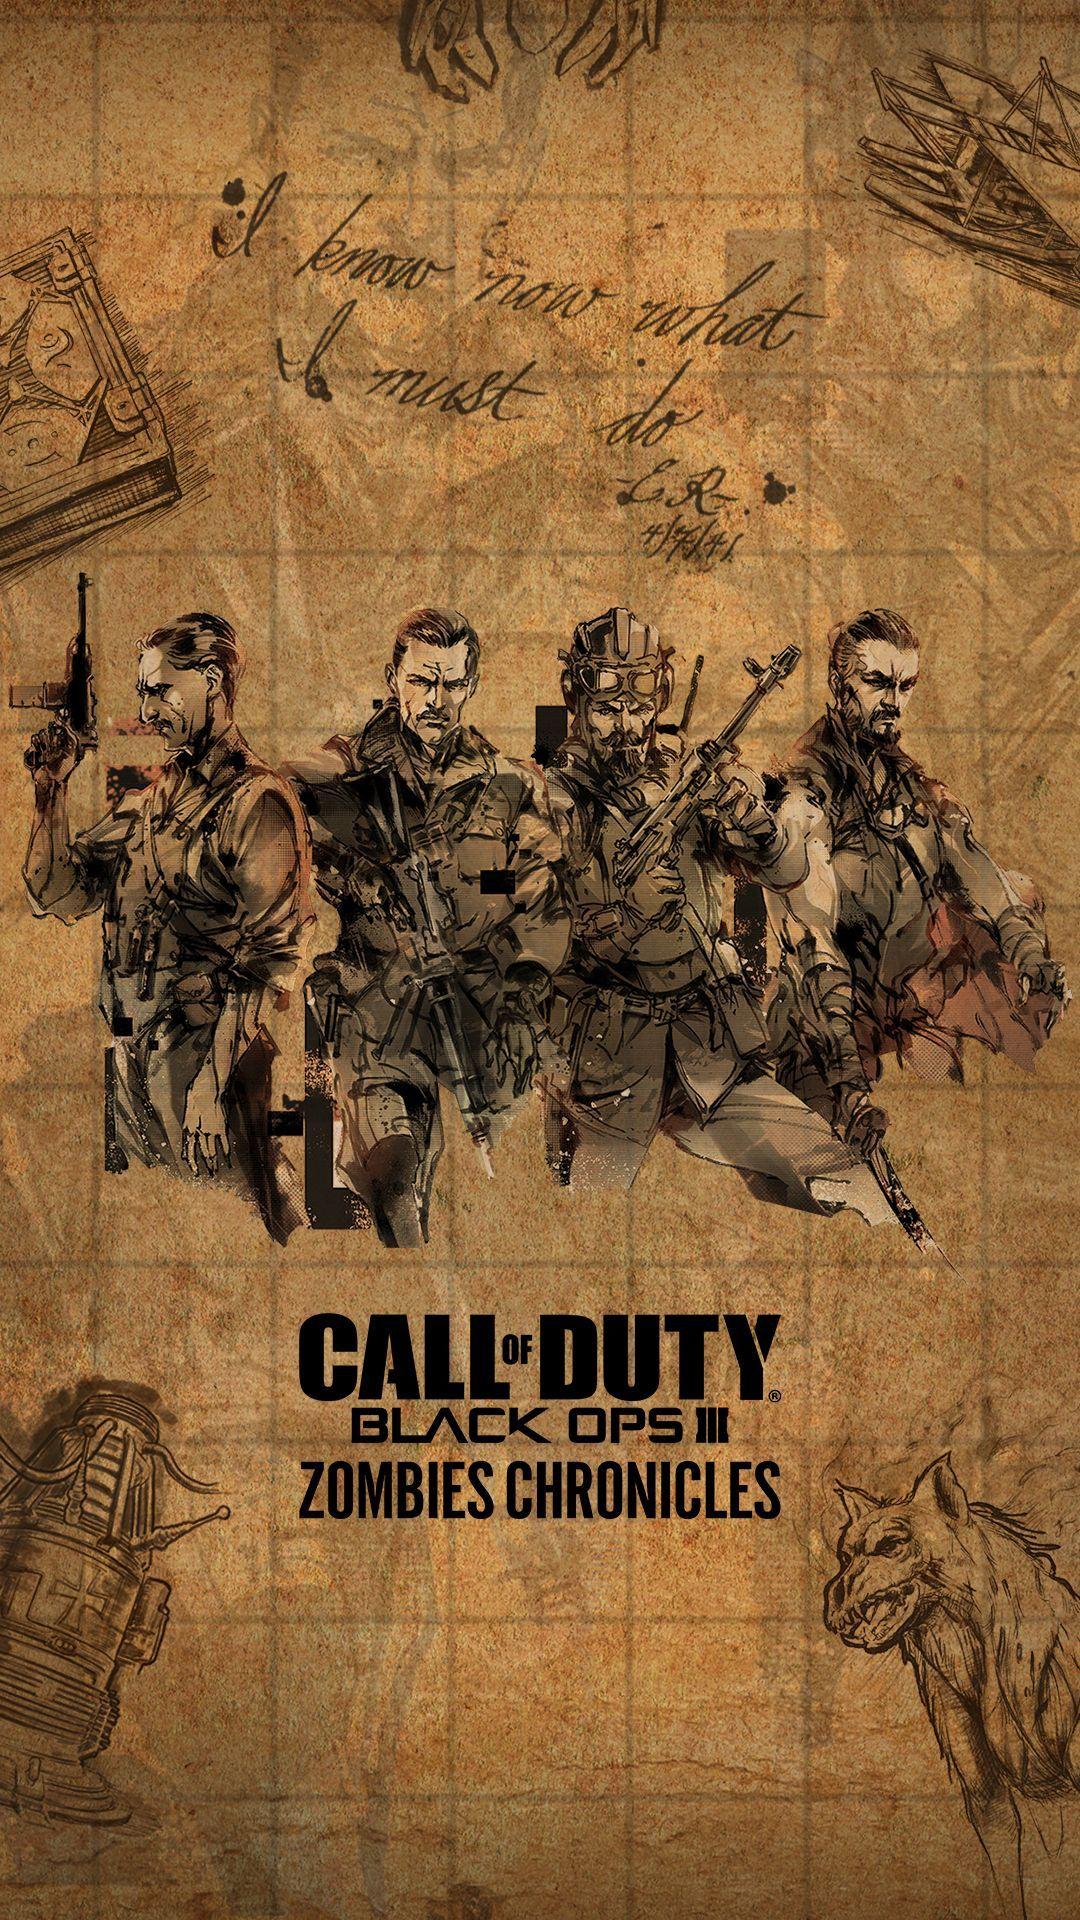 call of duty mobile zombies